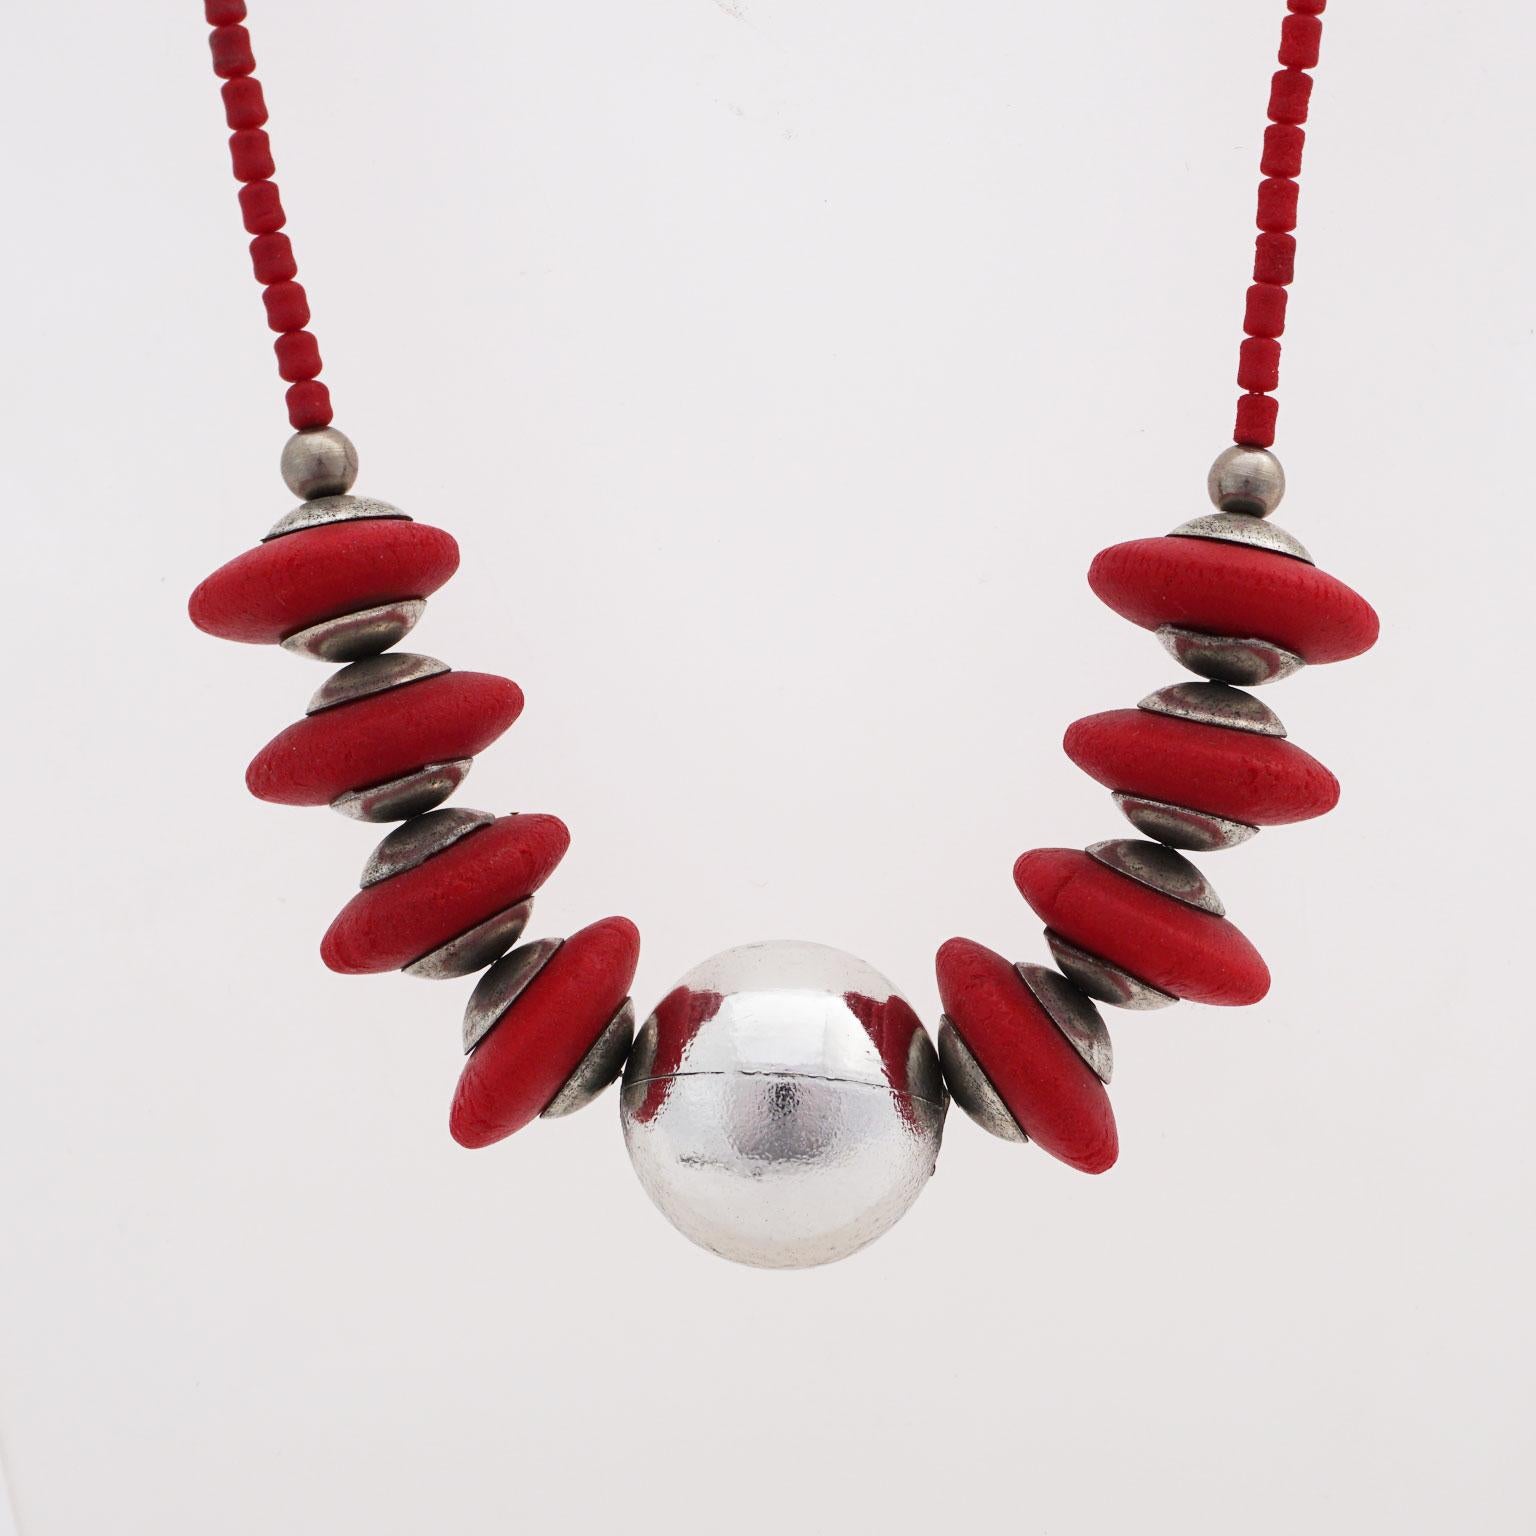 Bauhaus Collier in Chrome and Galalith by Jakob Bengel, around 1920/30 For Sale 2